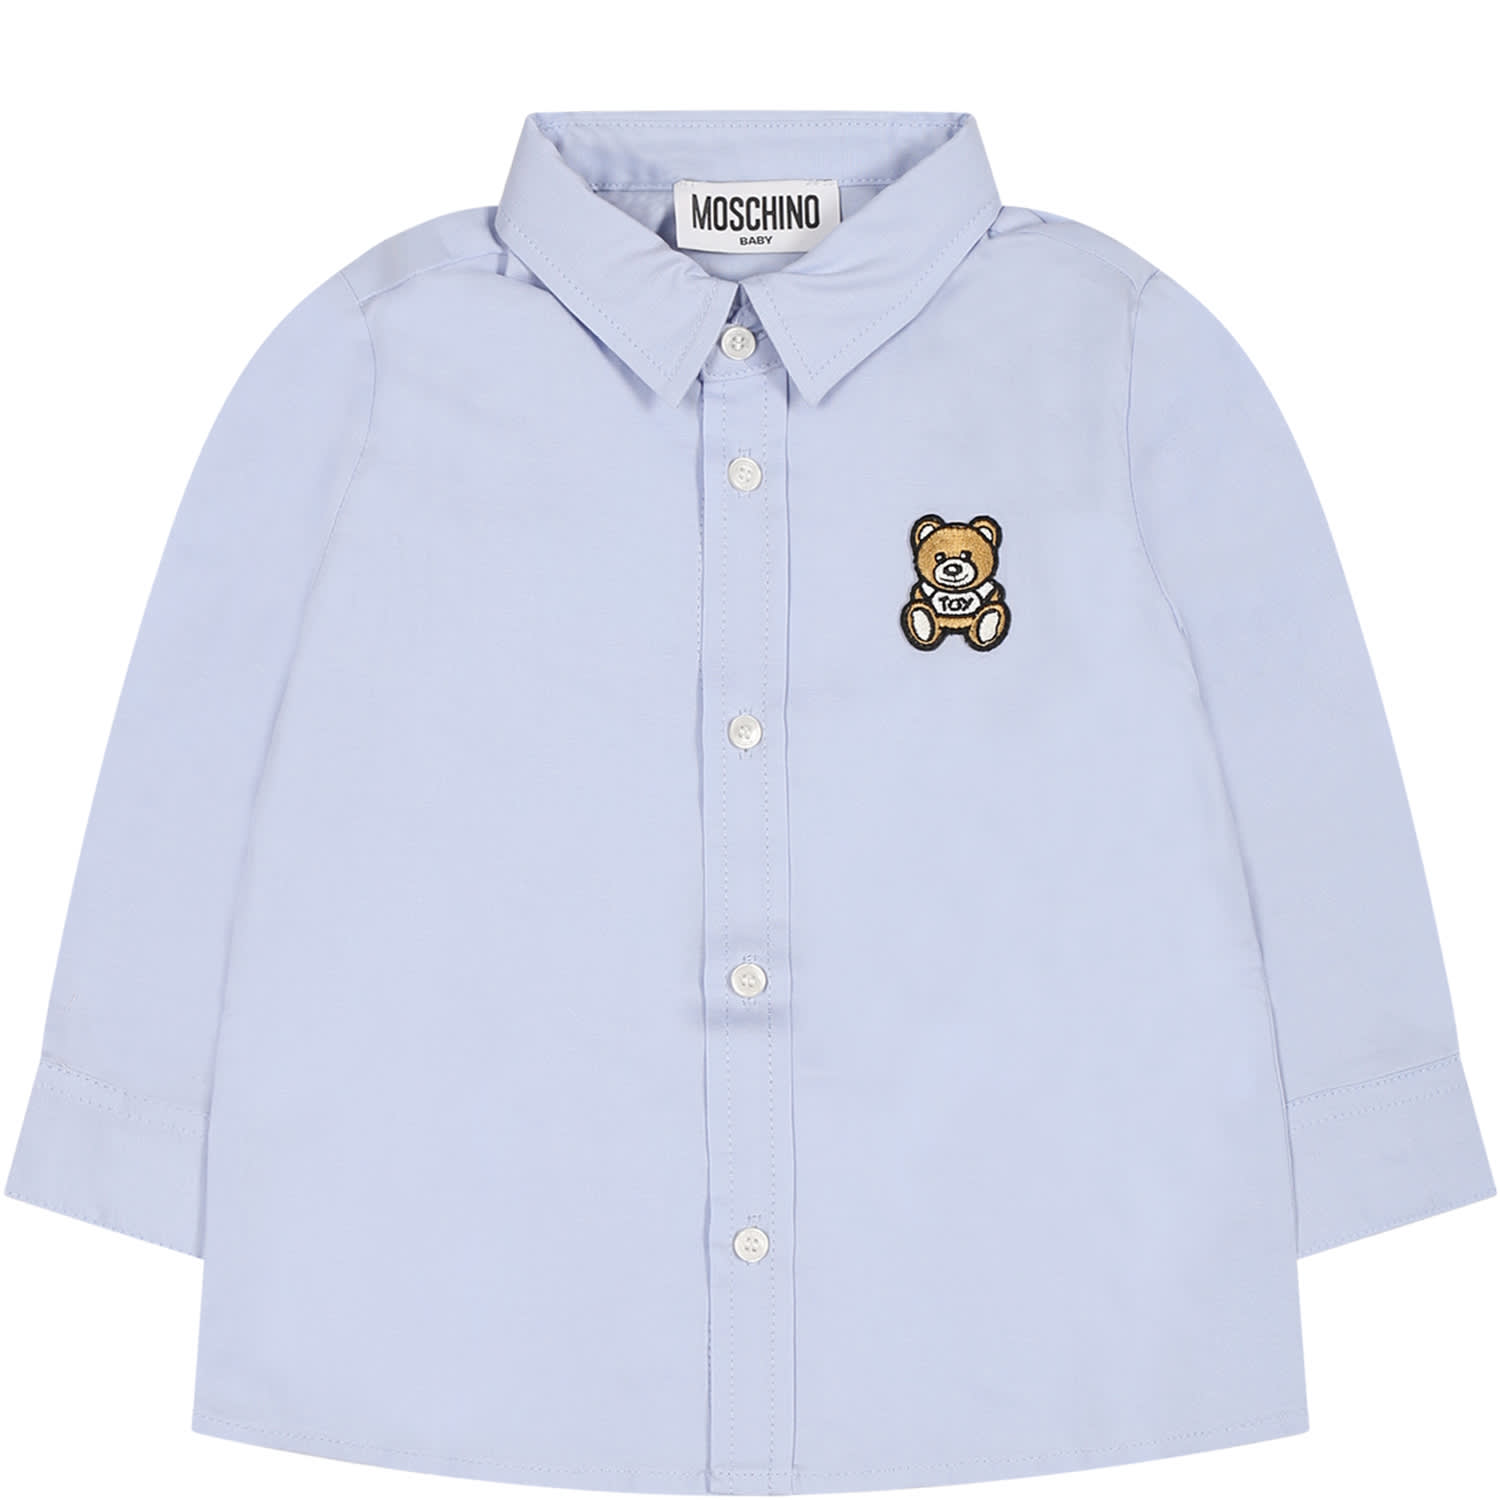 Moschino Light Blue Shirt For Baby Boy With Teddy Bear シャツ